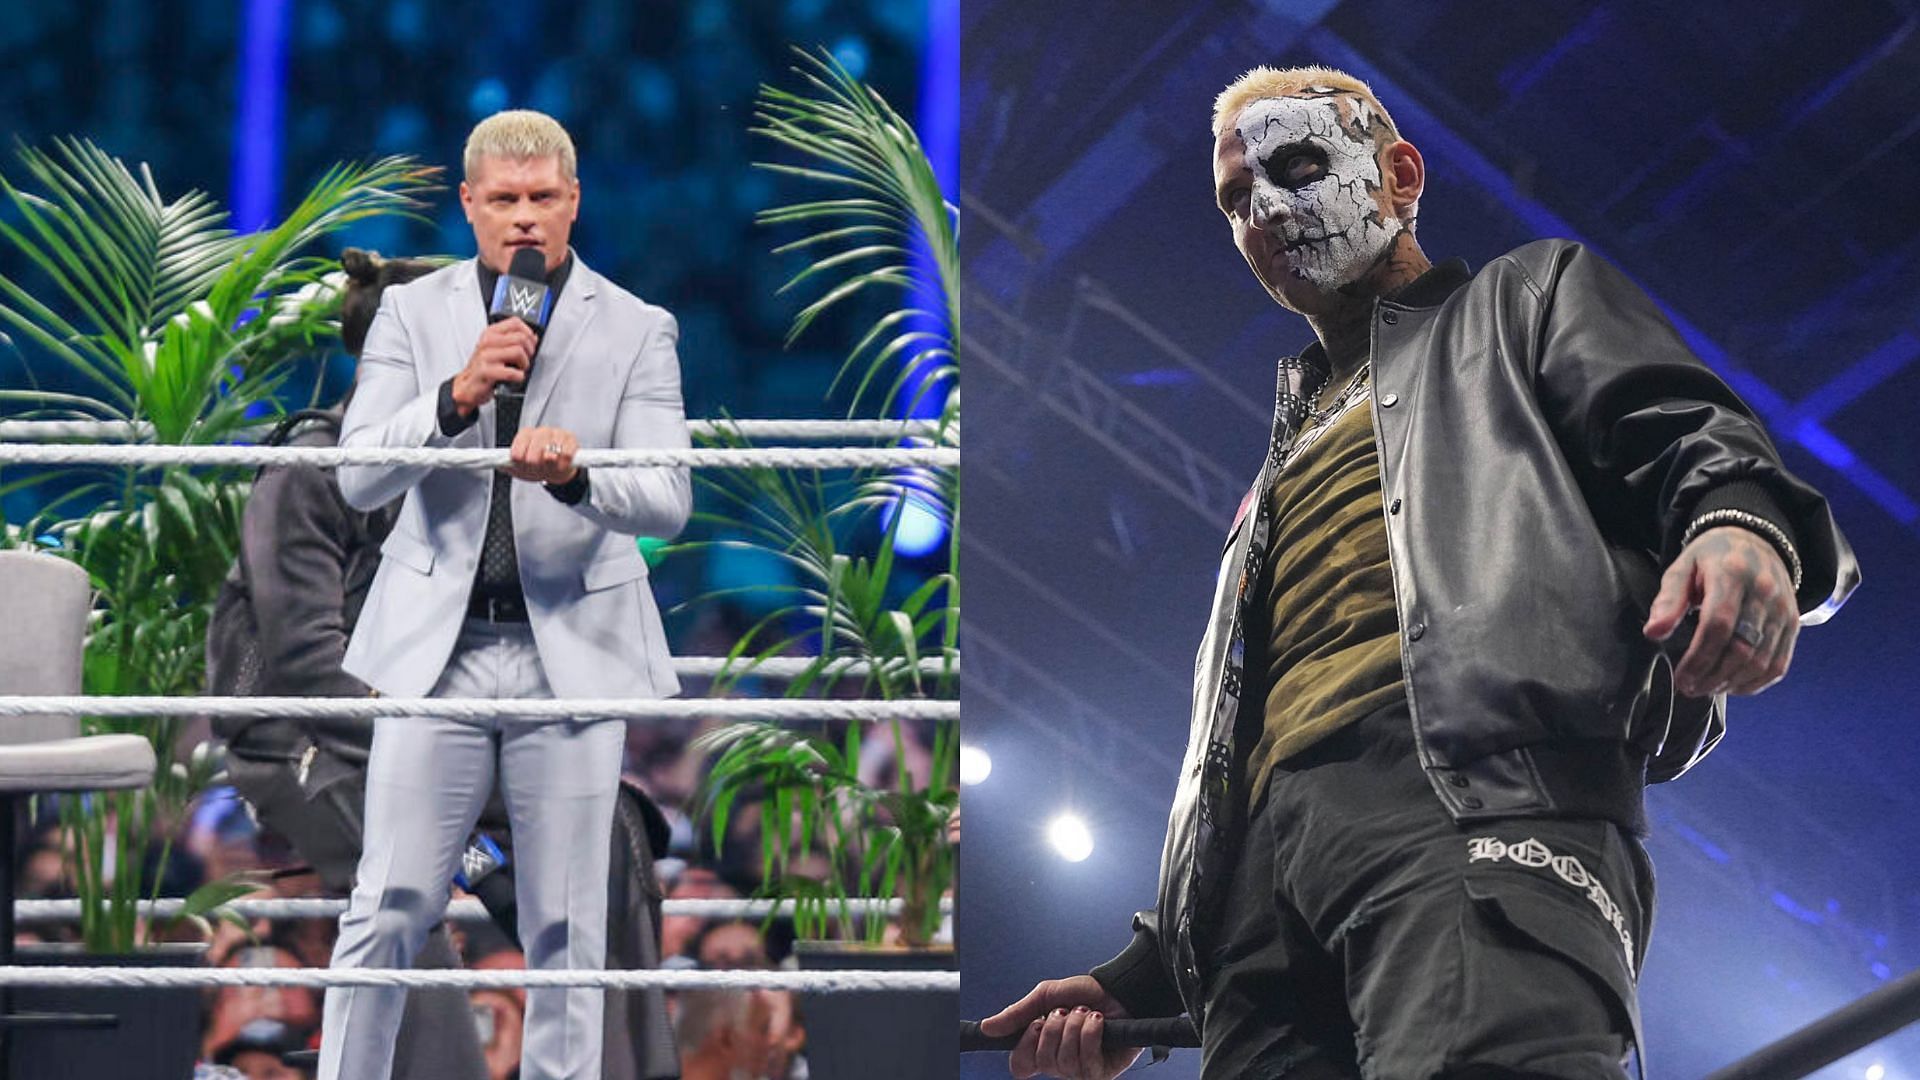 Darby Allin recently referenced Cody Rhodes in one of his promos [Photos courtesy of AEW and WWE